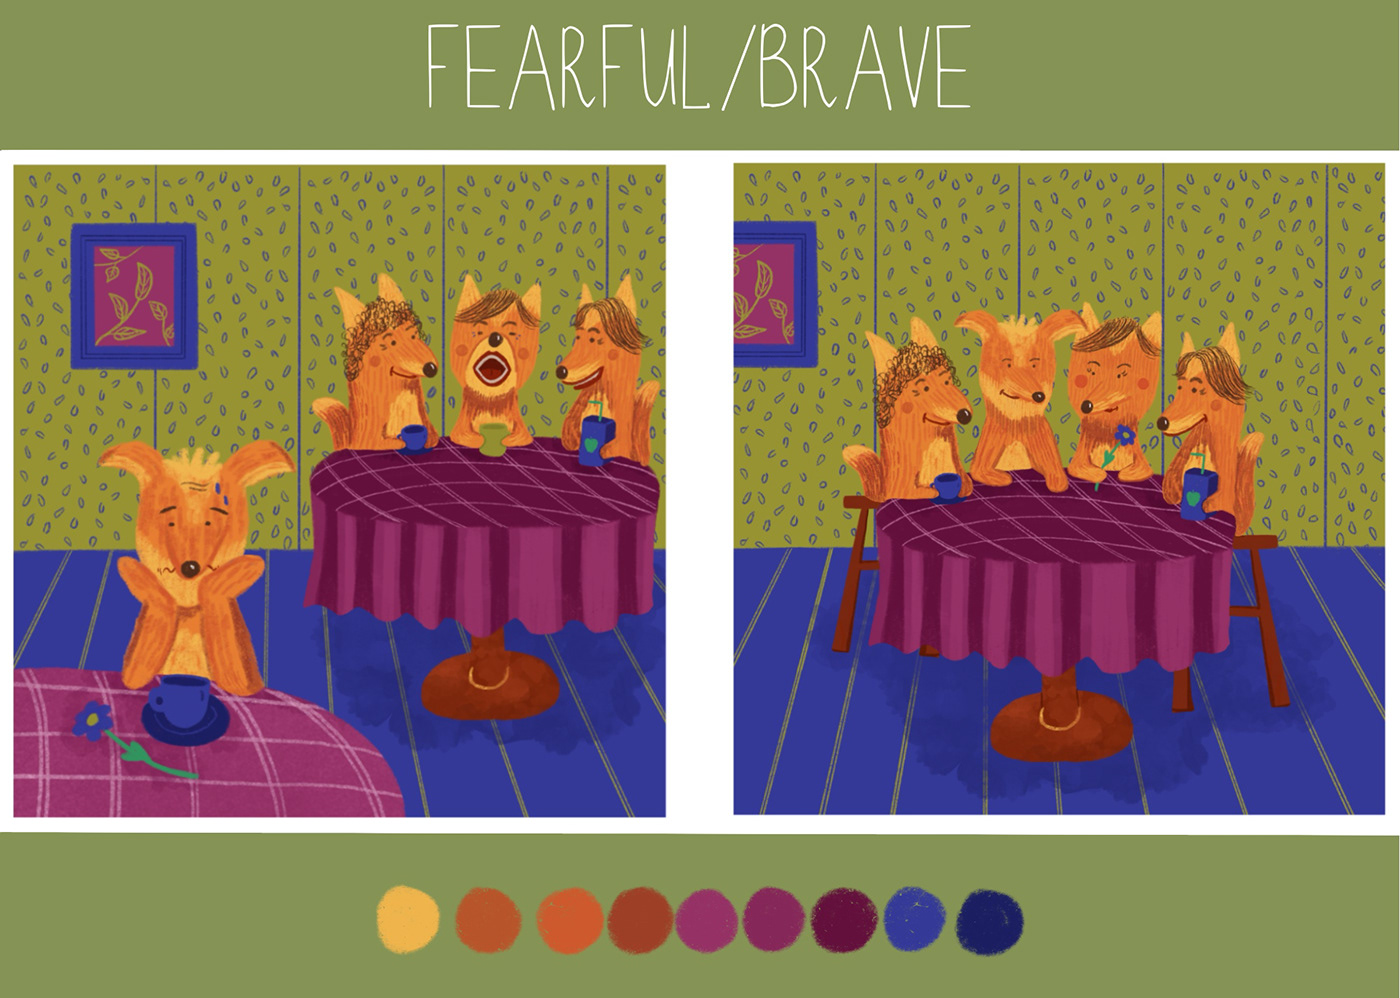 Illustrations for Fearful and brave contest.
